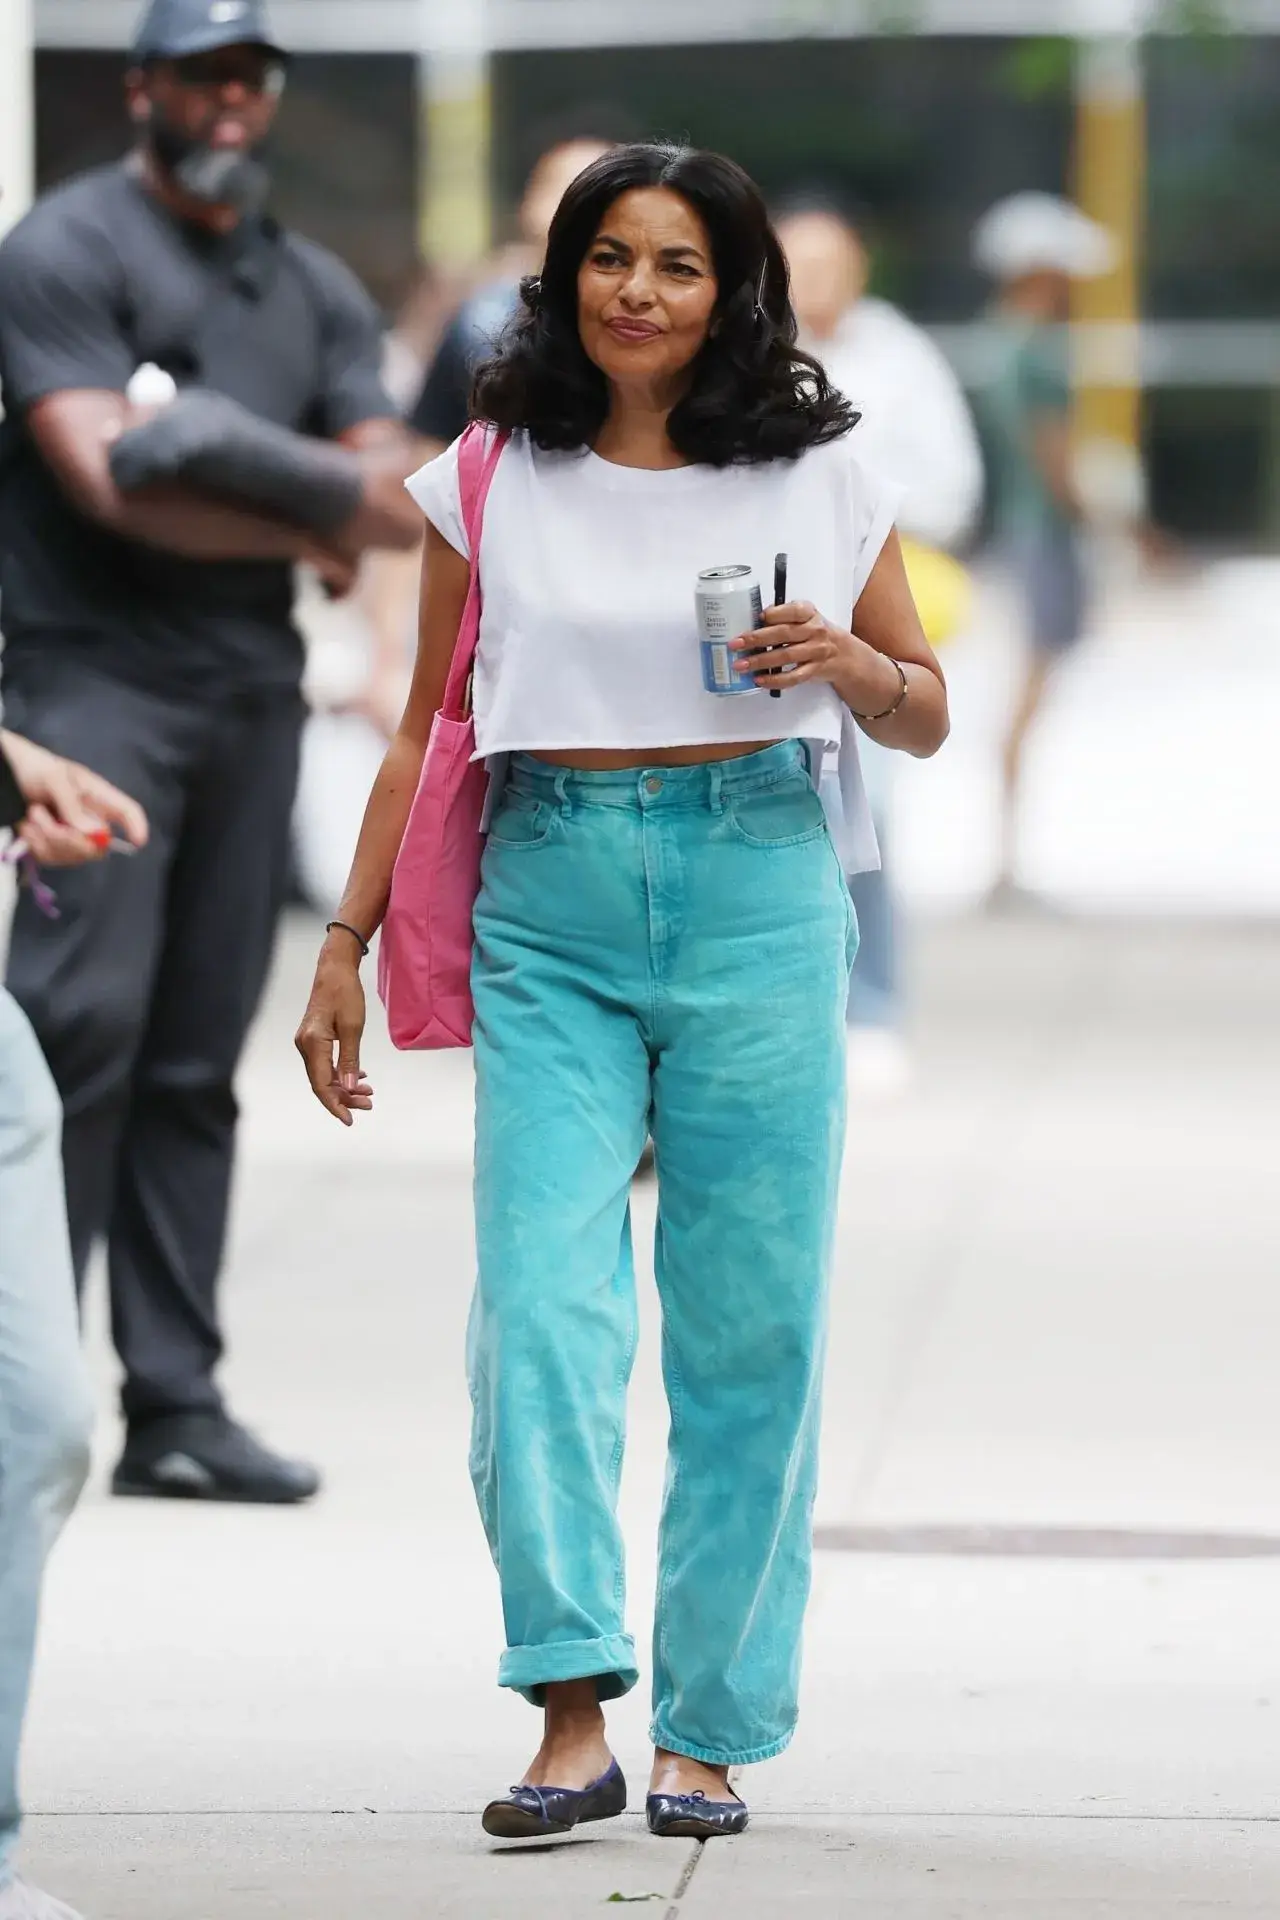 SARITA CHOUDHURY STILLS ON THE SET OF AND JUST LIKE THAT IN NEW YORK 3